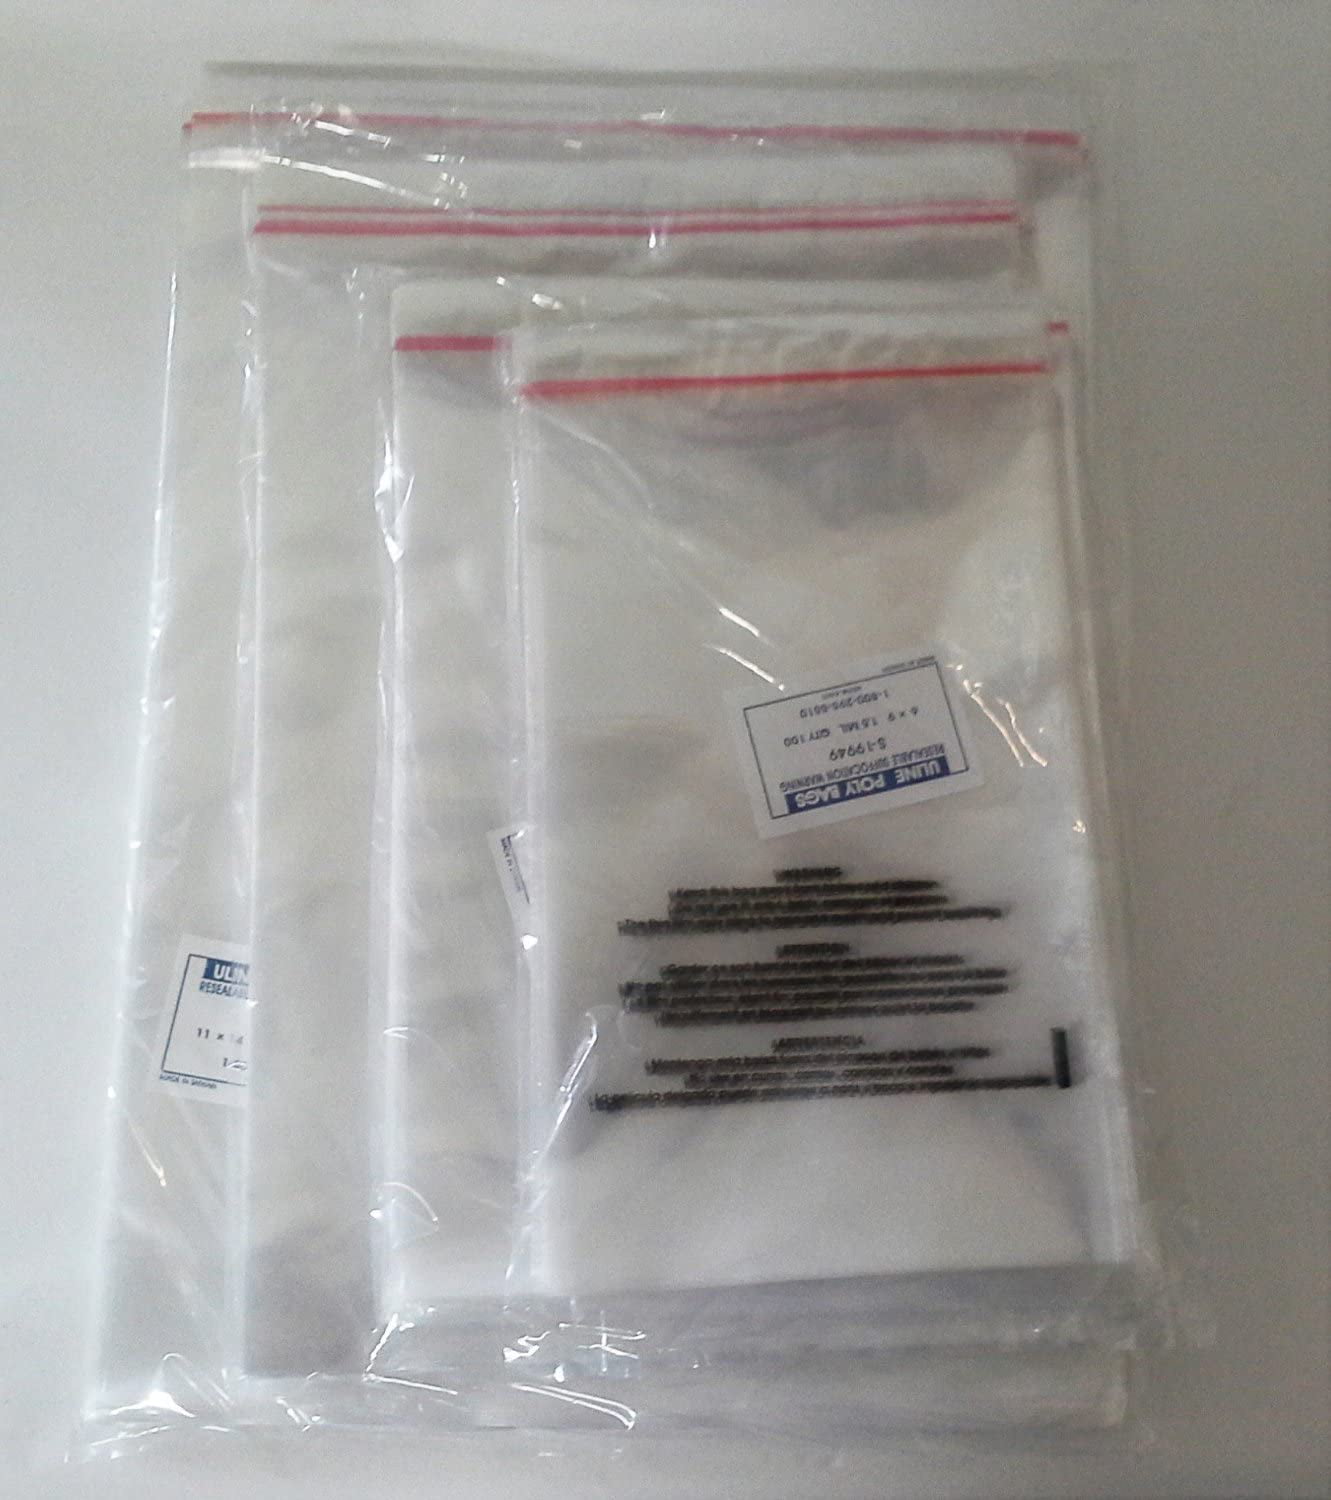 2000 9x12 Suffocation Warning Self Seal Clear Poly Bags 1.5MIL 9" x 12" 